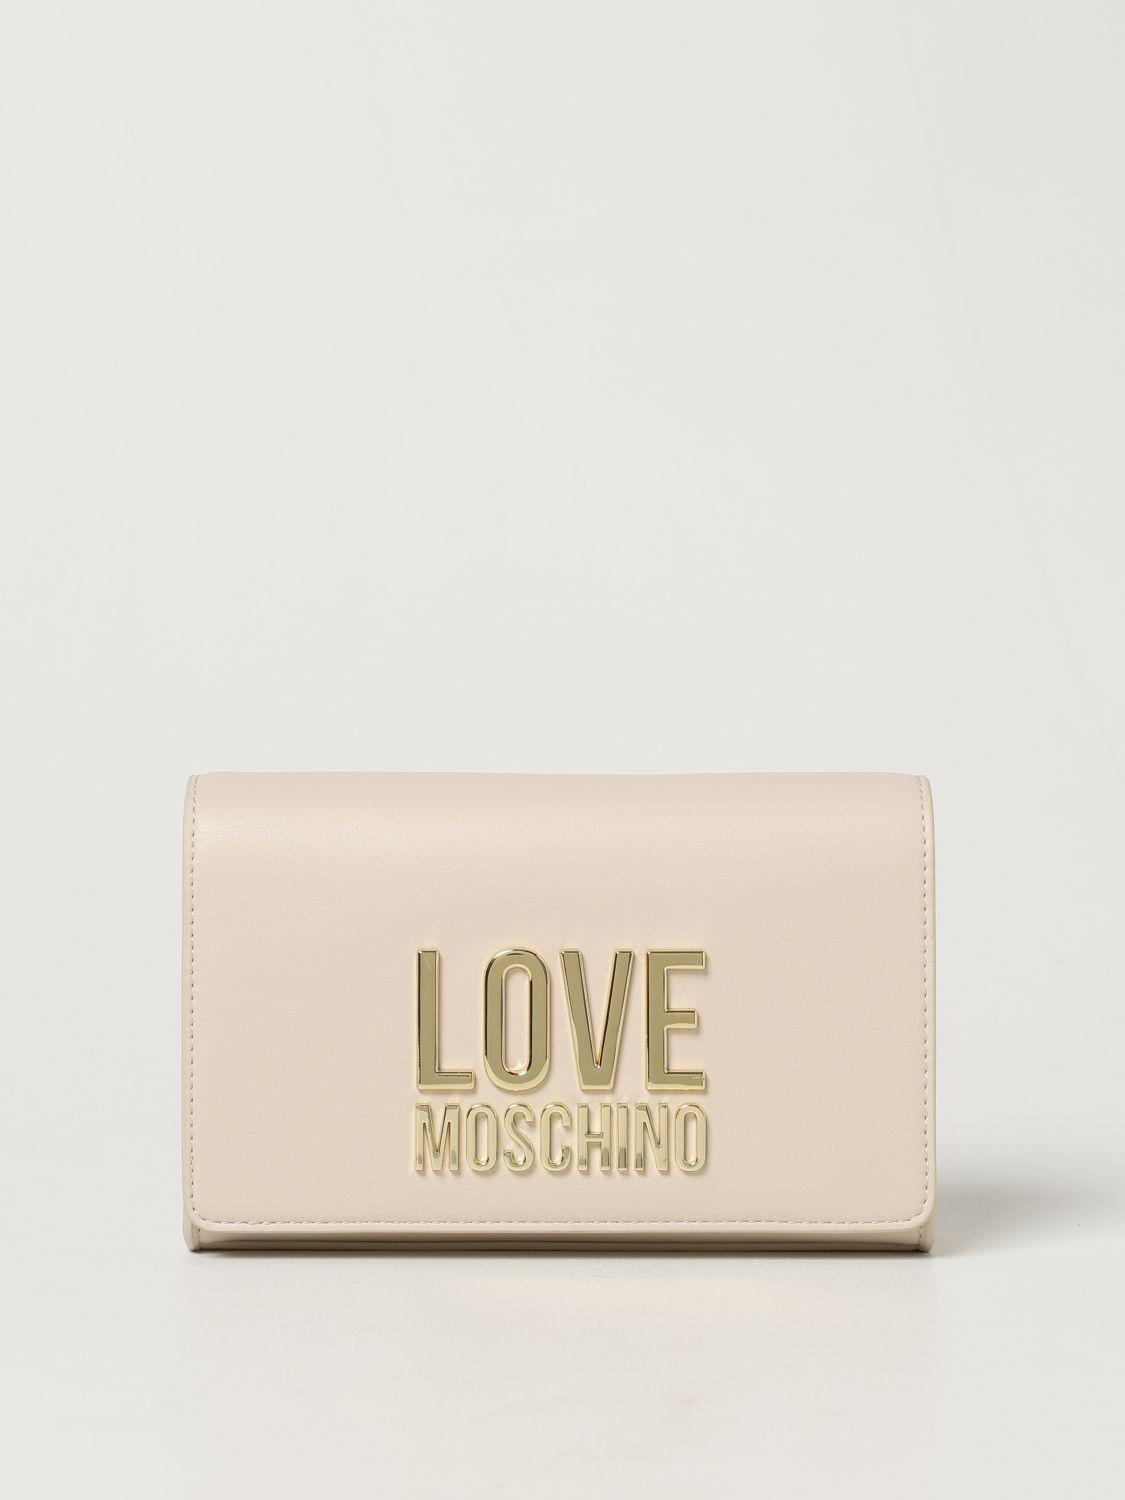 Love Moschino Bag In Synthetic Leather With Logo in Ivory (White) - Lyst